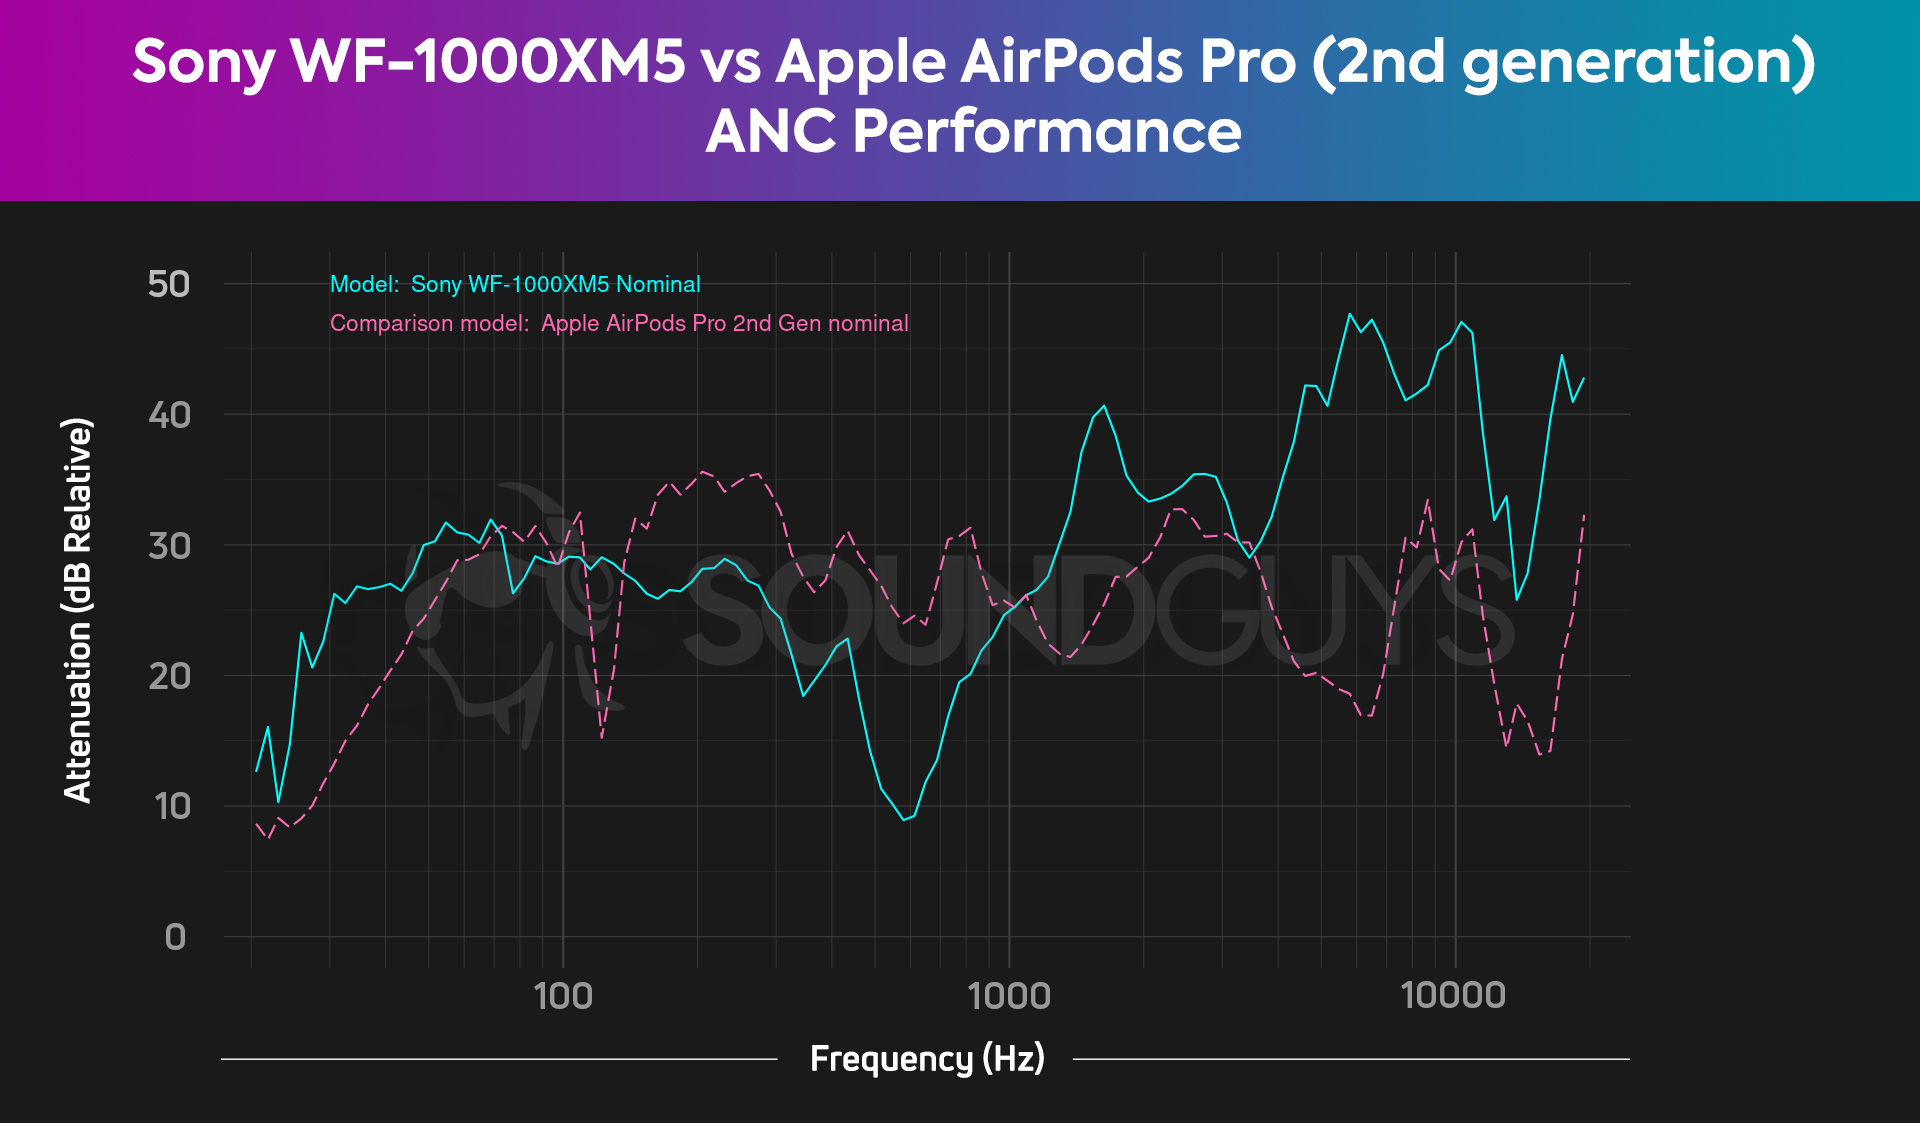 Sony WF 1000XM5 vs Apple AirPods Pro 2nd generation comparison ANC attenuation performance chart